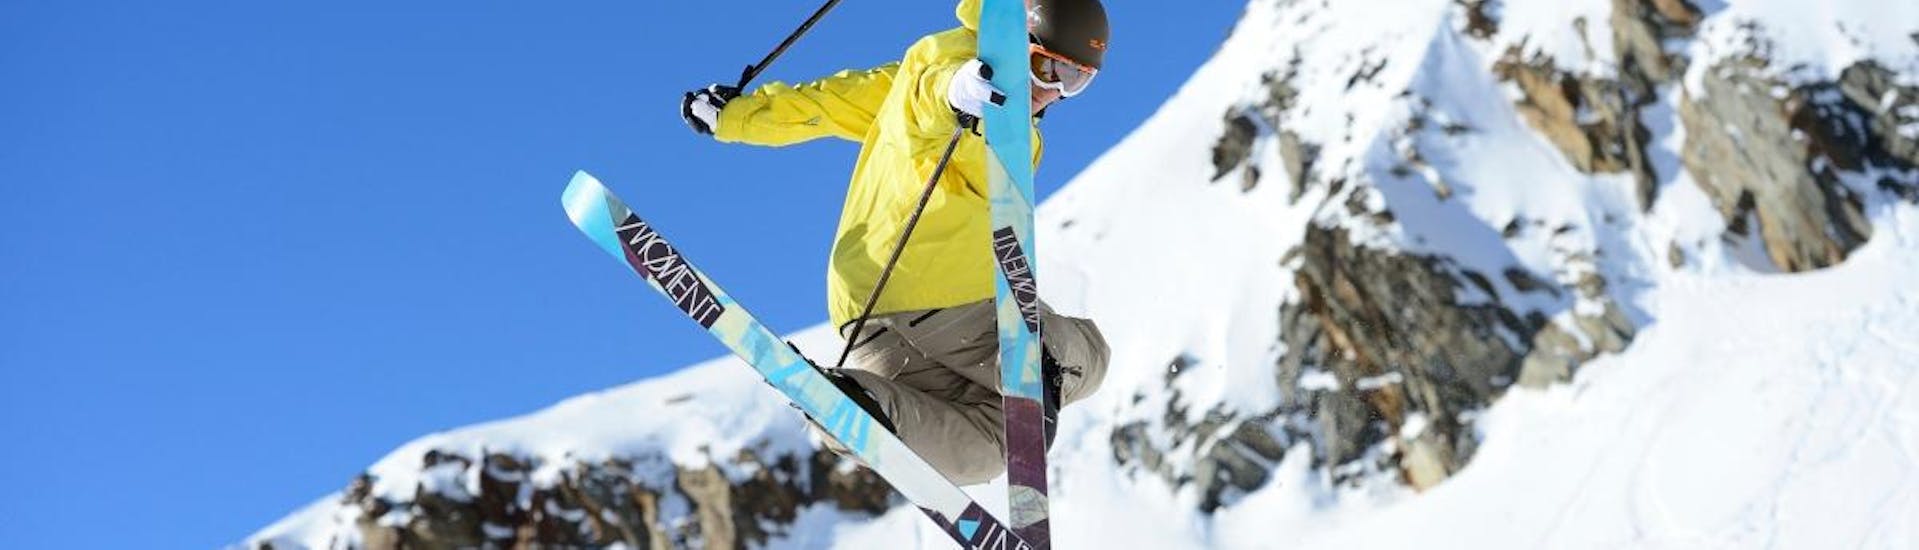 A freestyle skier is doing some tricks in the air as part of his Private Freestyle Skiing Lessons for Advanced Skiers with Giorgio Rocca Ski Academy Crans-Montana.